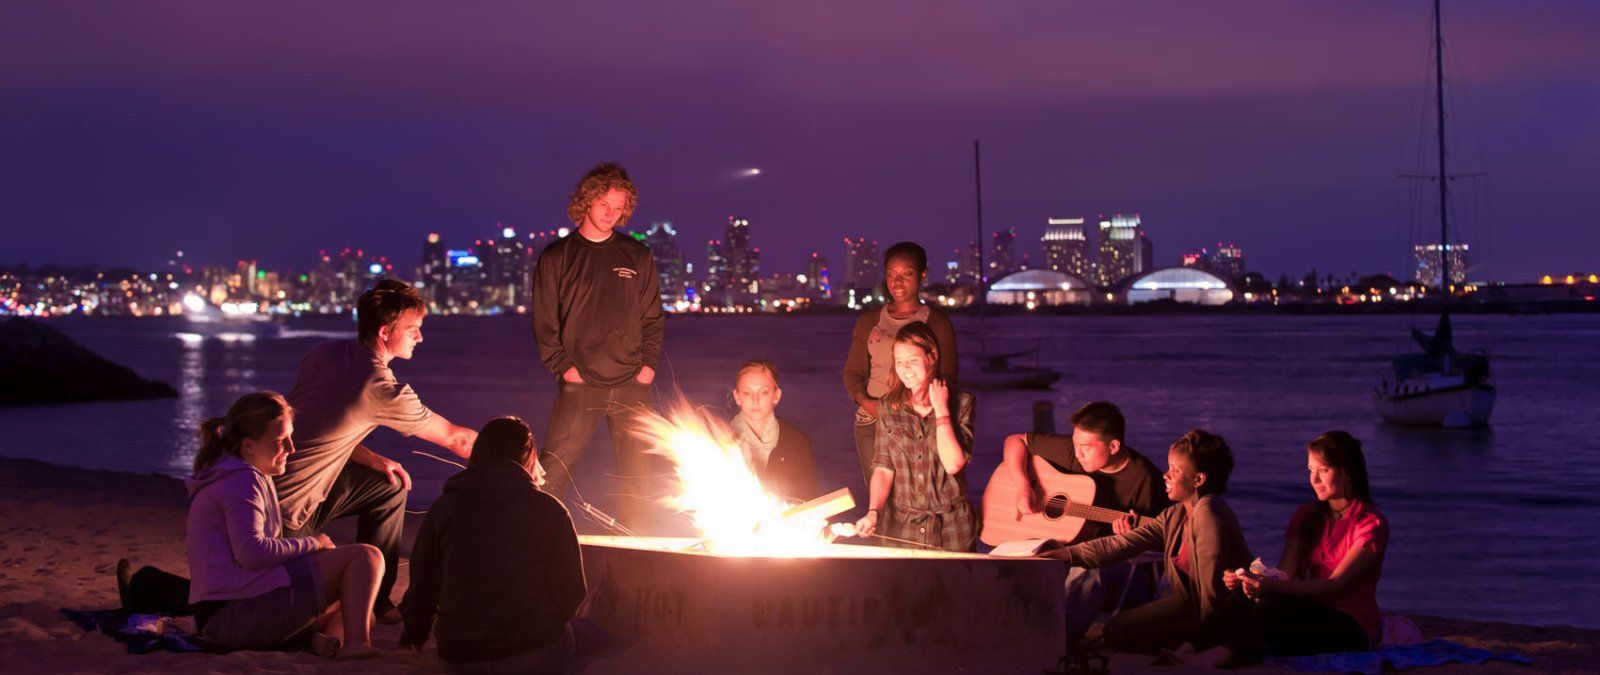 69 students have a beach bonfire at night and play music while at Shelter Island in San Diego.